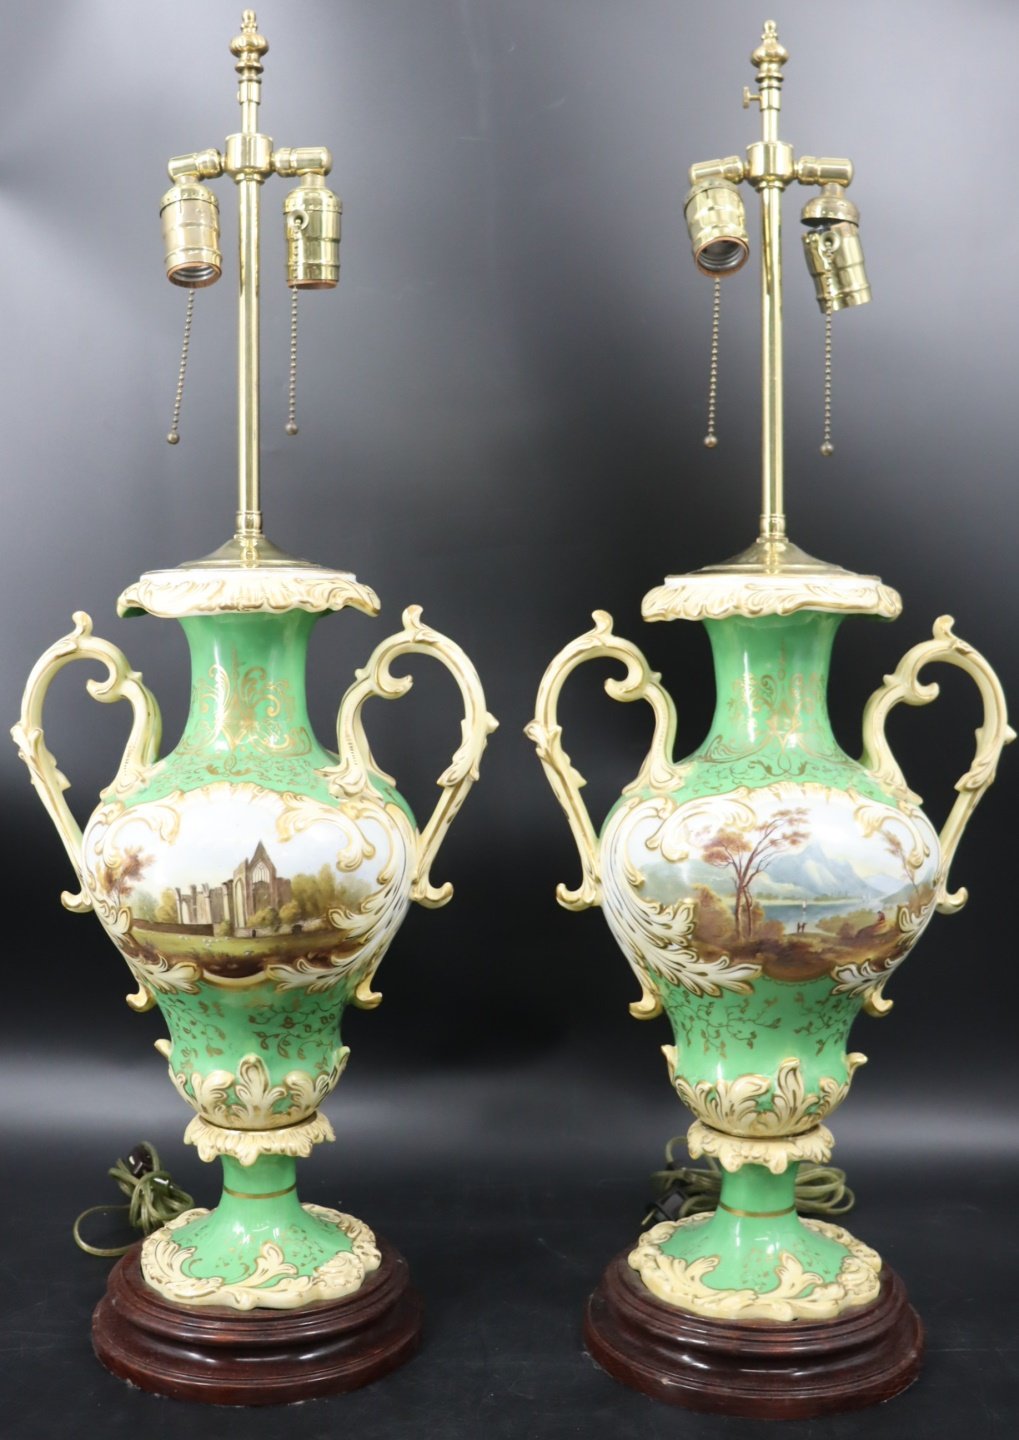 A FINE PAIR OF PORCELAIN URNS MOUNTED 30b838